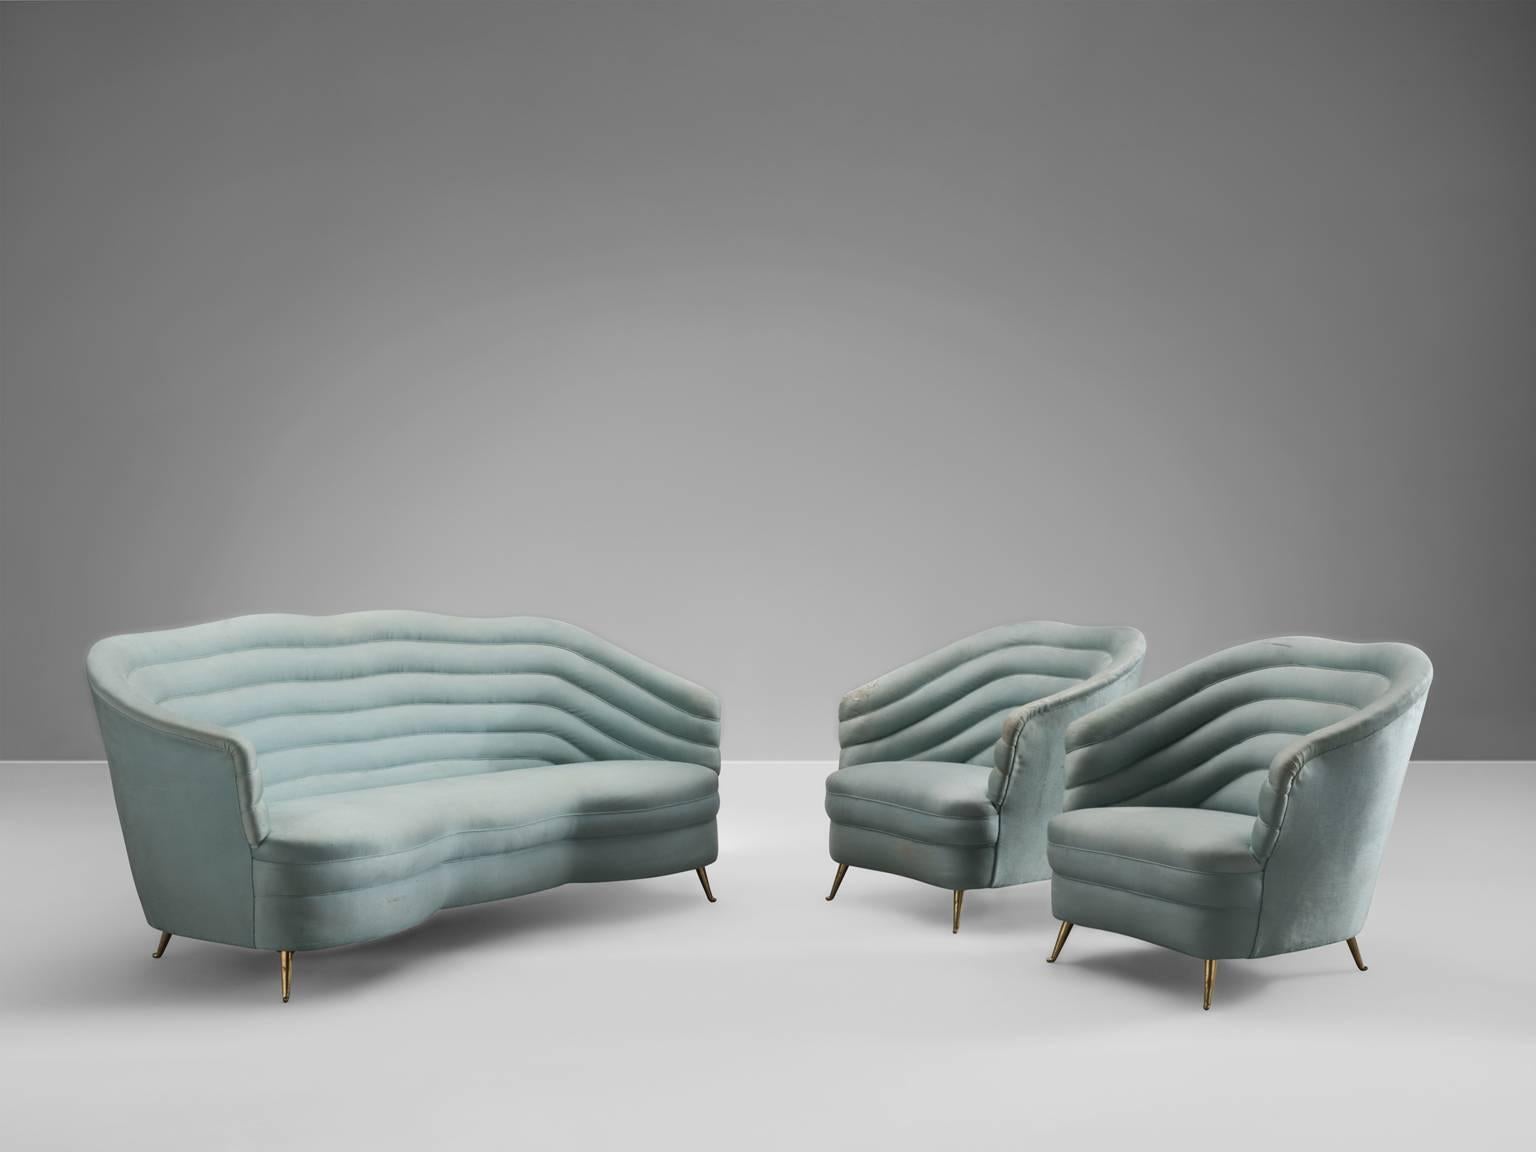 Set of lounge chairs and matching sofa in velvet and metal by Andrea Busiri Vici, Italy, 1960s. 

These elegant, voluptuous lounge chairs and sofa our now shown in an aquamarine, light-blue velvet. The term organic seems to be invented for this